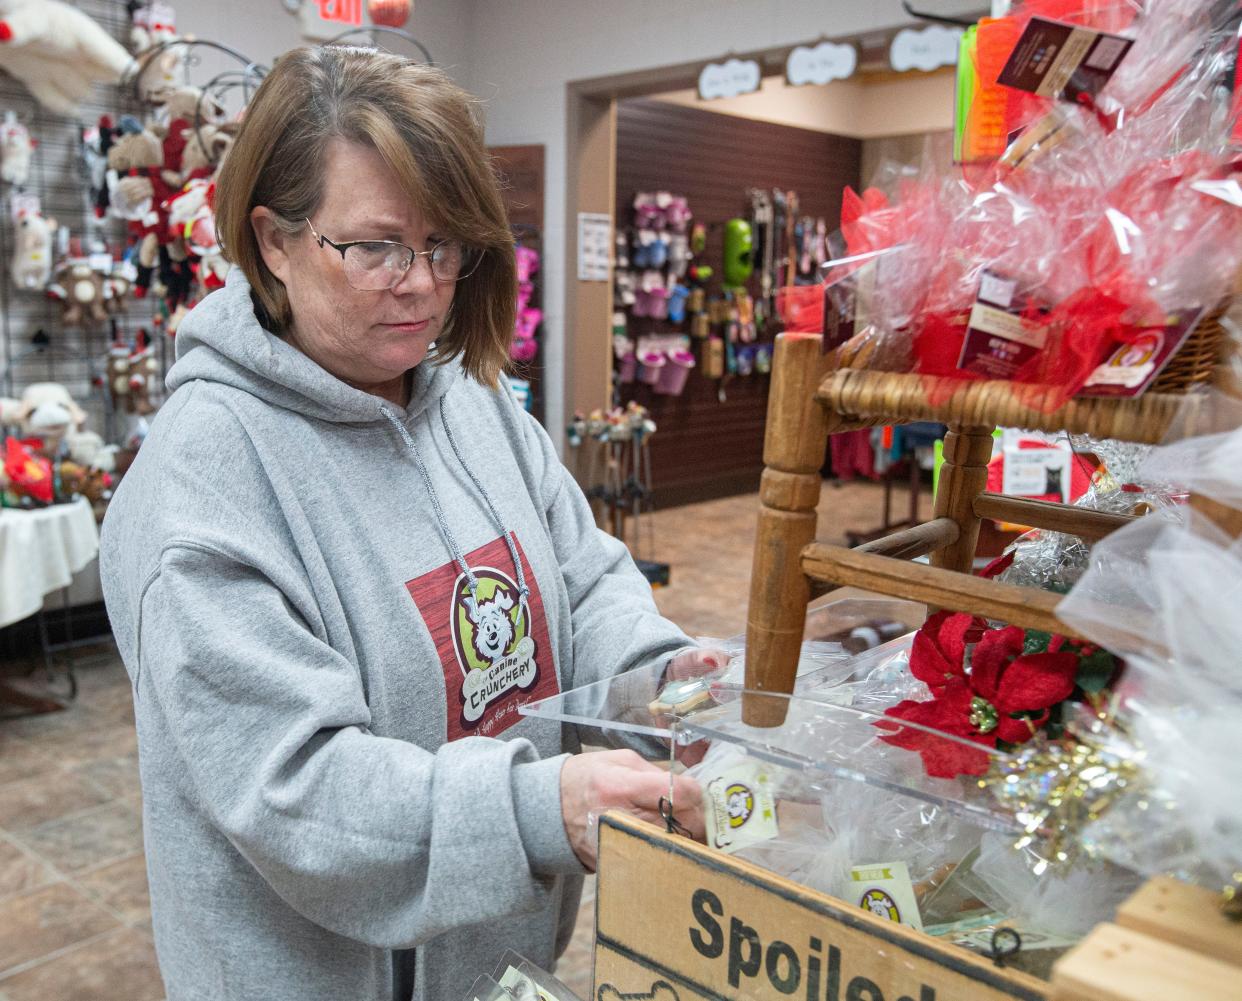 Jane Femminella, owner of The Canine Crunchery, Inc. checks the cookie display on Friday, Dec. 9, 2022, at The Canine Crunchery, Inc. in Rockford.